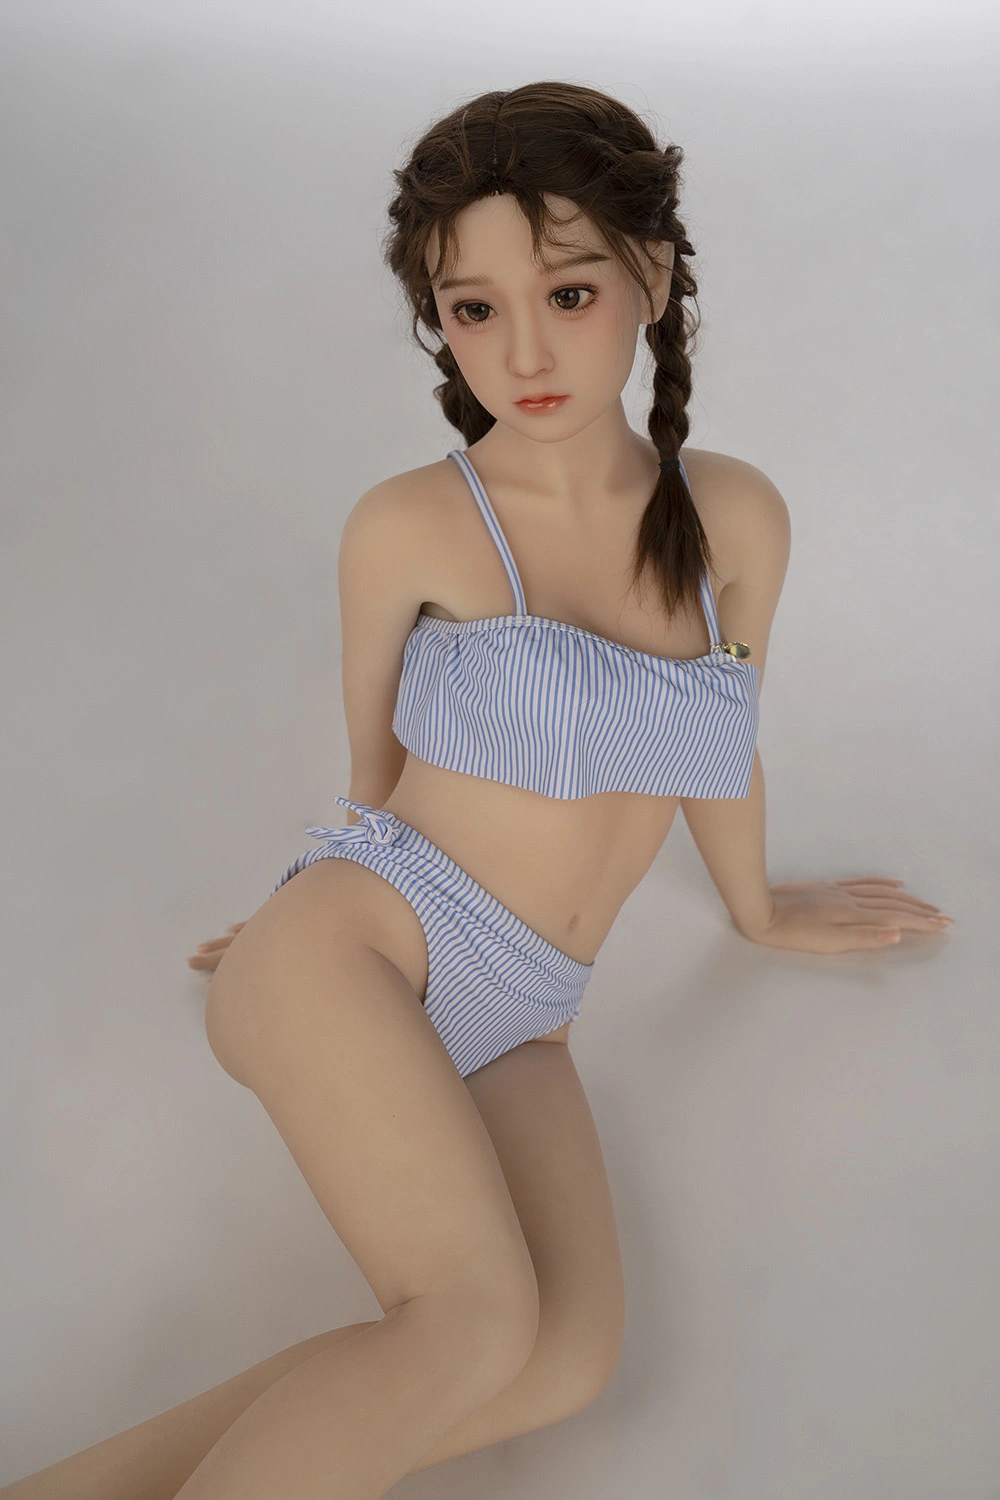  mixed-race style TPE loli real doll